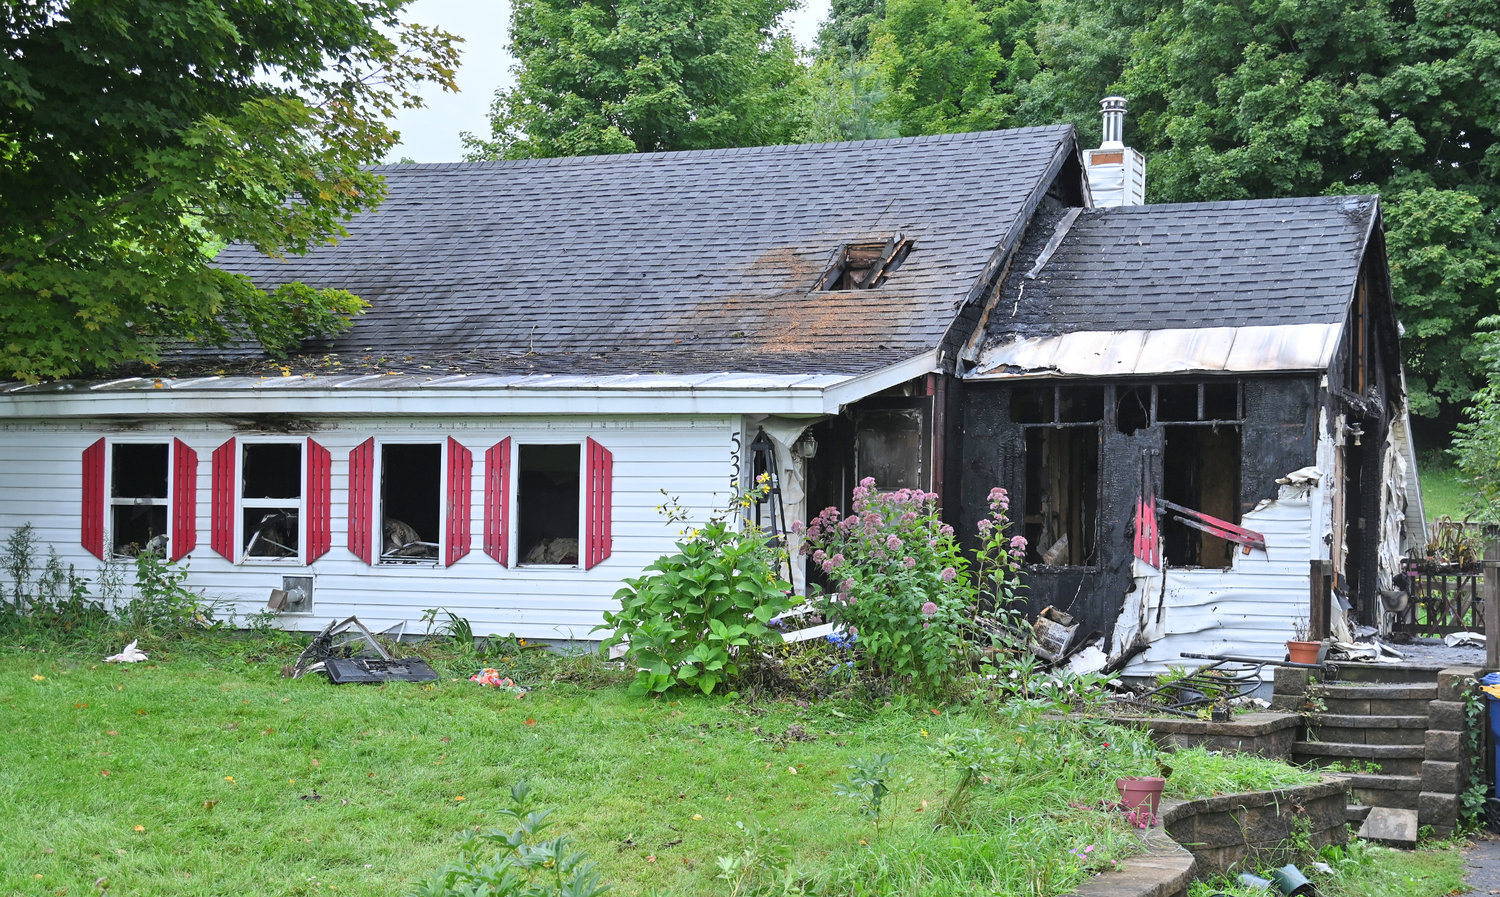 A 57-year-old mother, bedridden from illness, perished when she was unable to escape her burning home on at 5357 Lee Valley Road on Monday night. Officials said an overloaded circuit utilized by an air conditioner, TV, and oxygen compressor, coupled with the oxygen tanks used by the victim, sparked an immediate and intense flash fire.